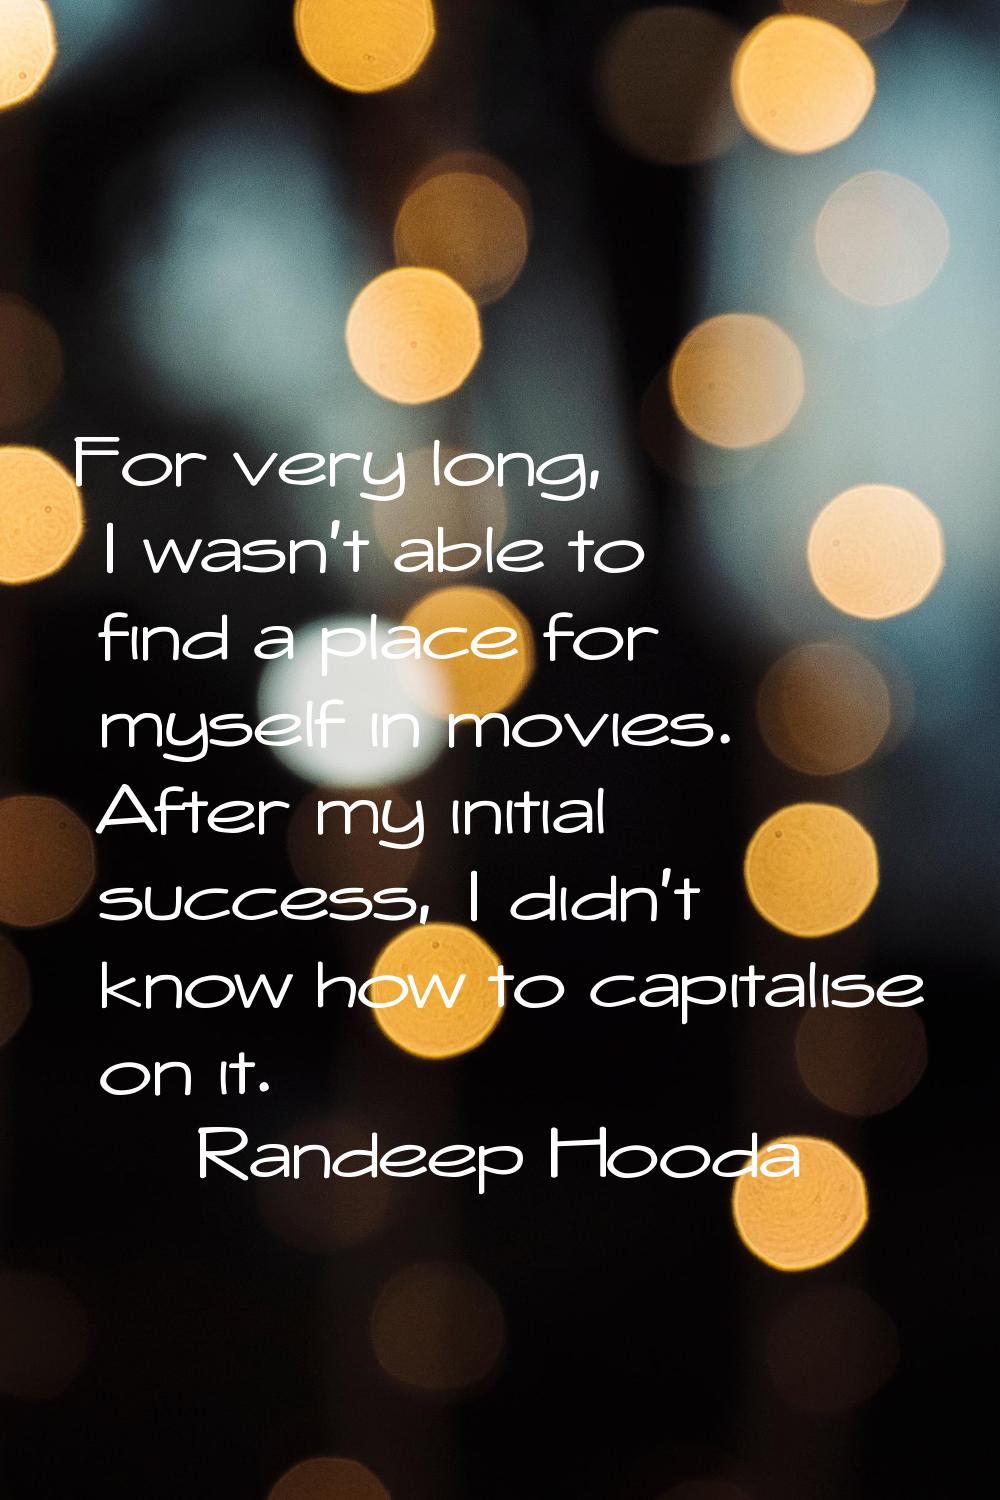 For very long, I wasn't able to find a place for myself in movies. After my initial success, I didn